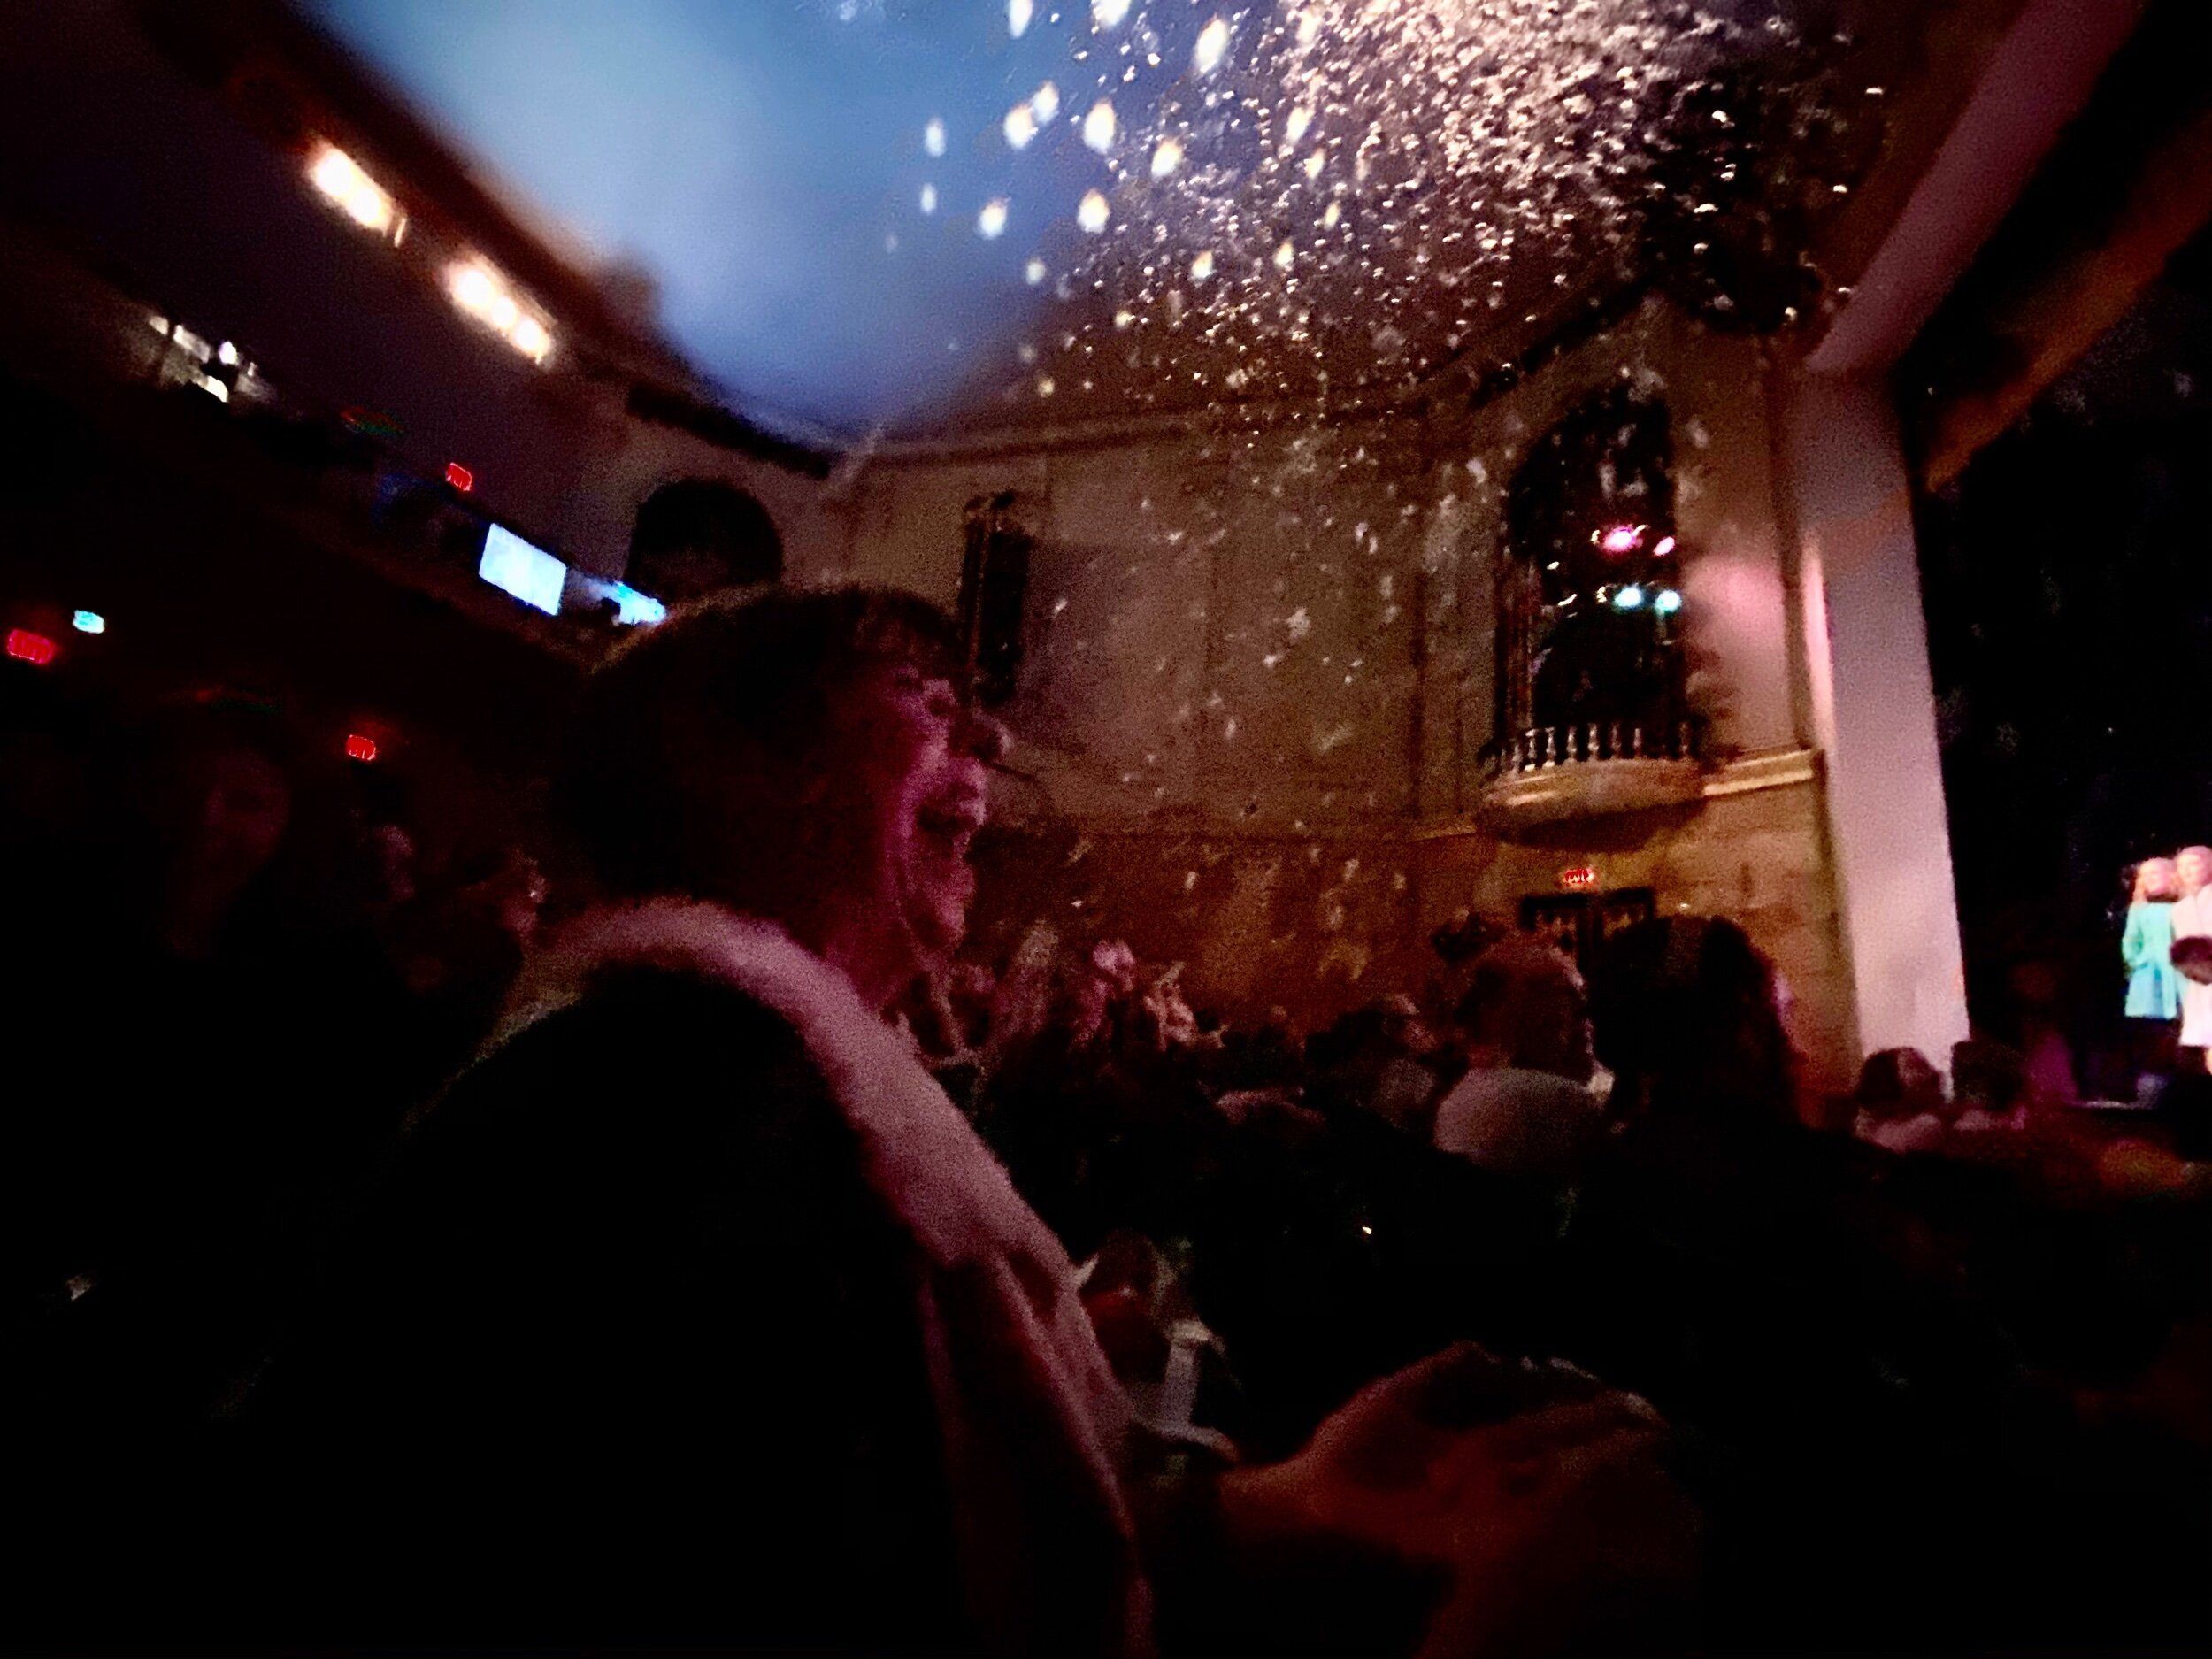 While the quality isn’t the best, the Ultra Wide lens was able to capture this moment of snow falling during a production of Elf: The Musical. I’ll take the perspective over the quality.